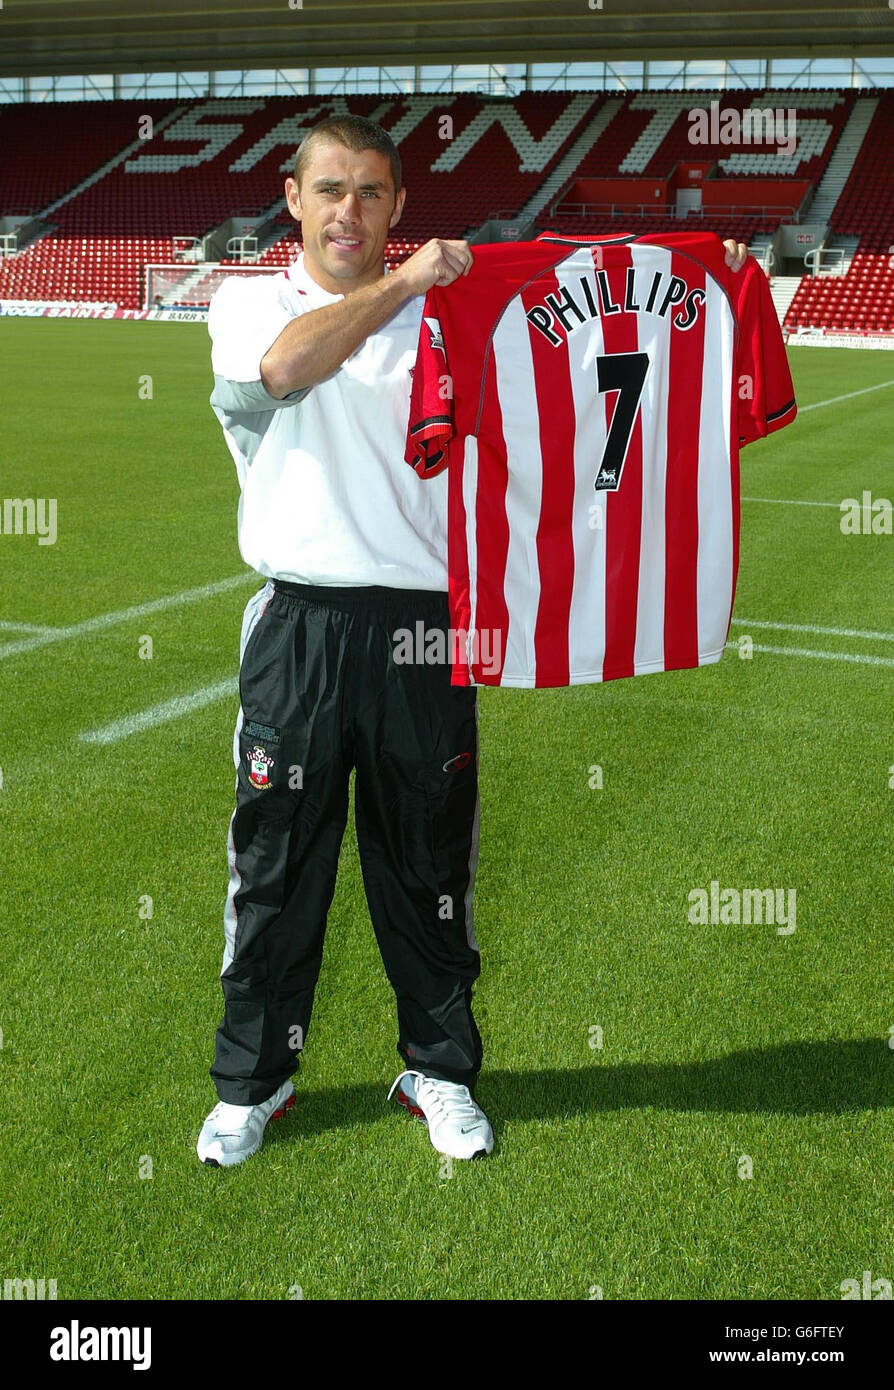 Former Sunderland Striker Kevin Phillips At The St Mary S Stadium Where He Signed A 3million Transfer Deal To Become A Player For Southampton Football Club Stock Photo Alamy